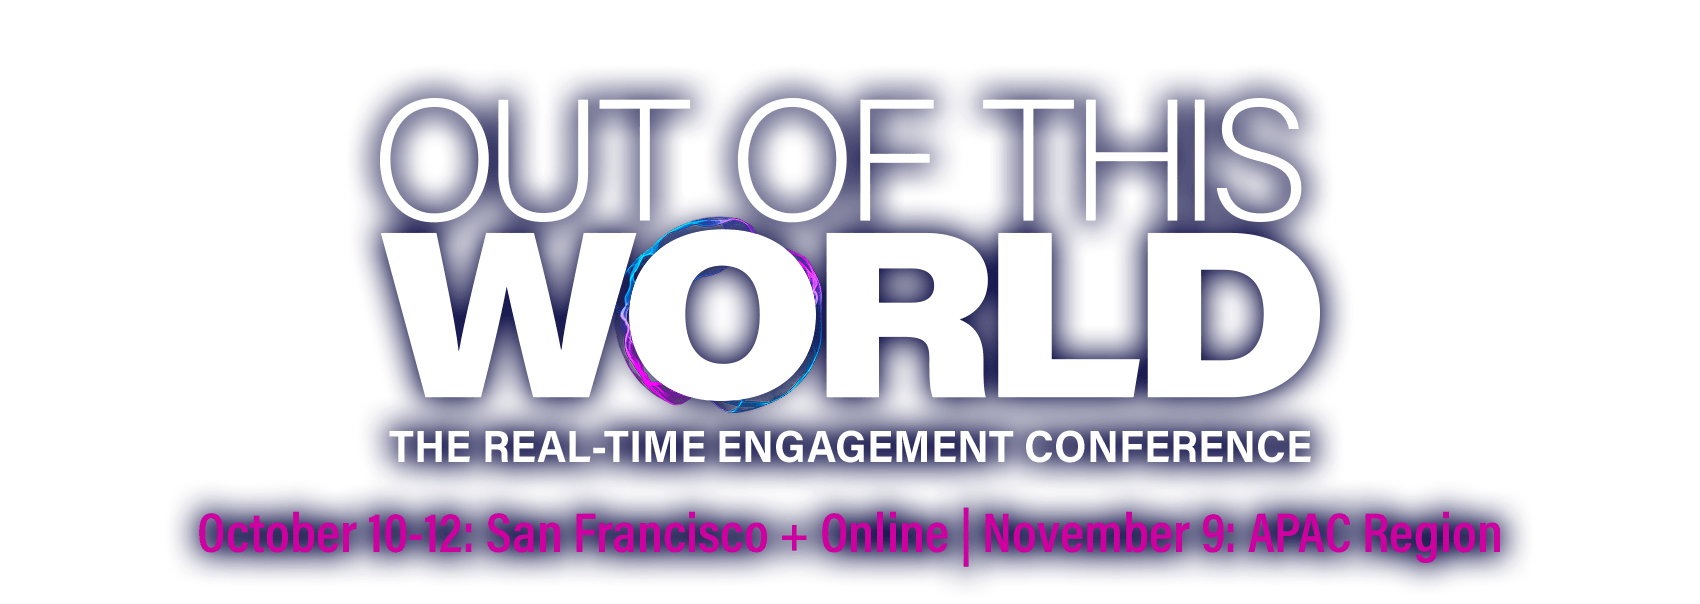 Out of this world, real-time engagement conference